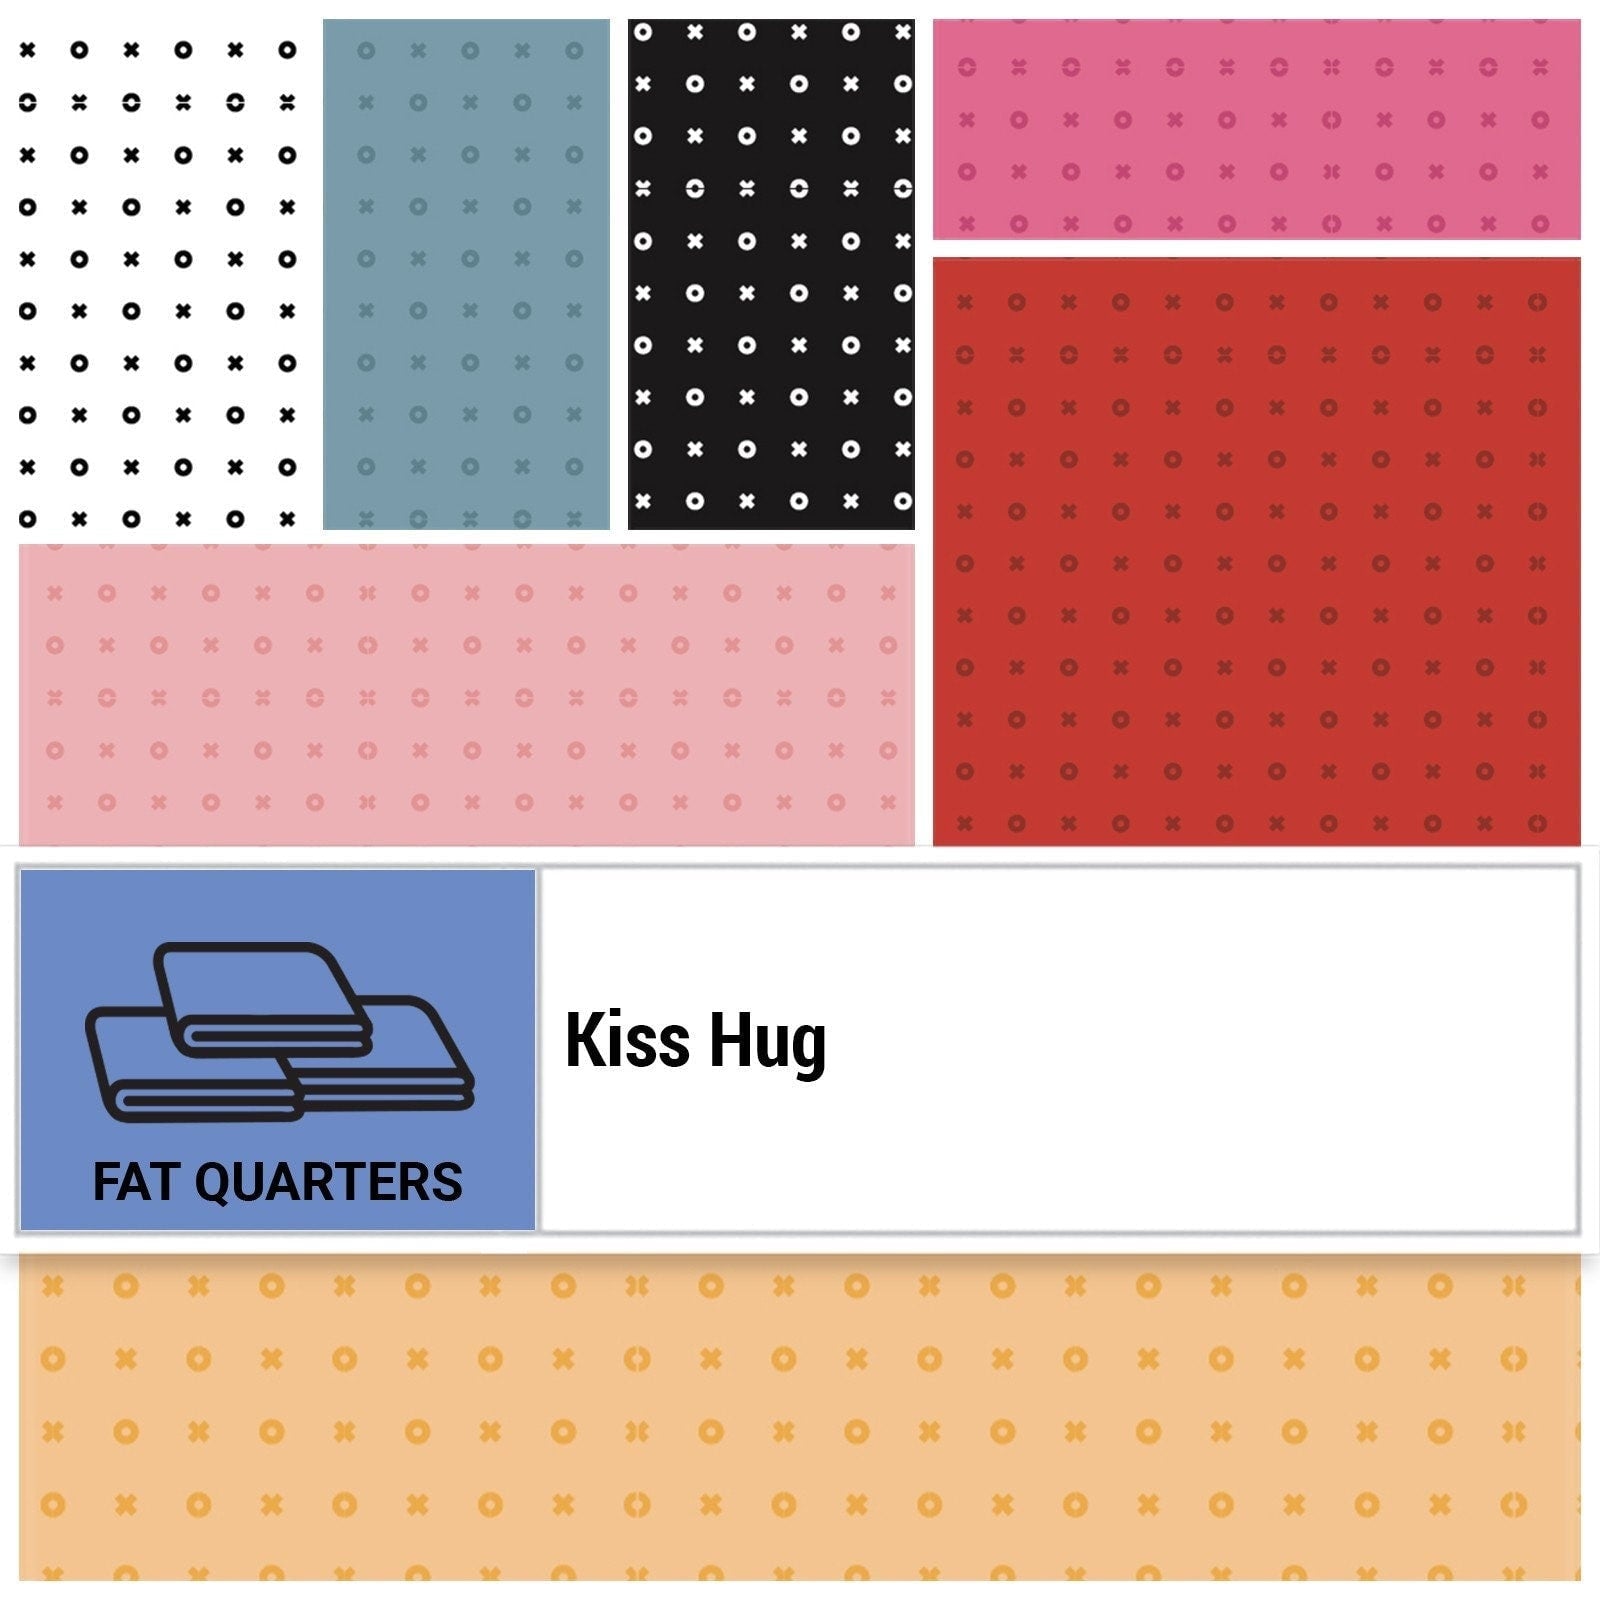 Kiss Hug set from Farmhouse Favorites by Poppie Cotton Quilter&#39;s Cotton Fat Quarter Bundle. 7 piece collection 18 inch x 22 inch squares.